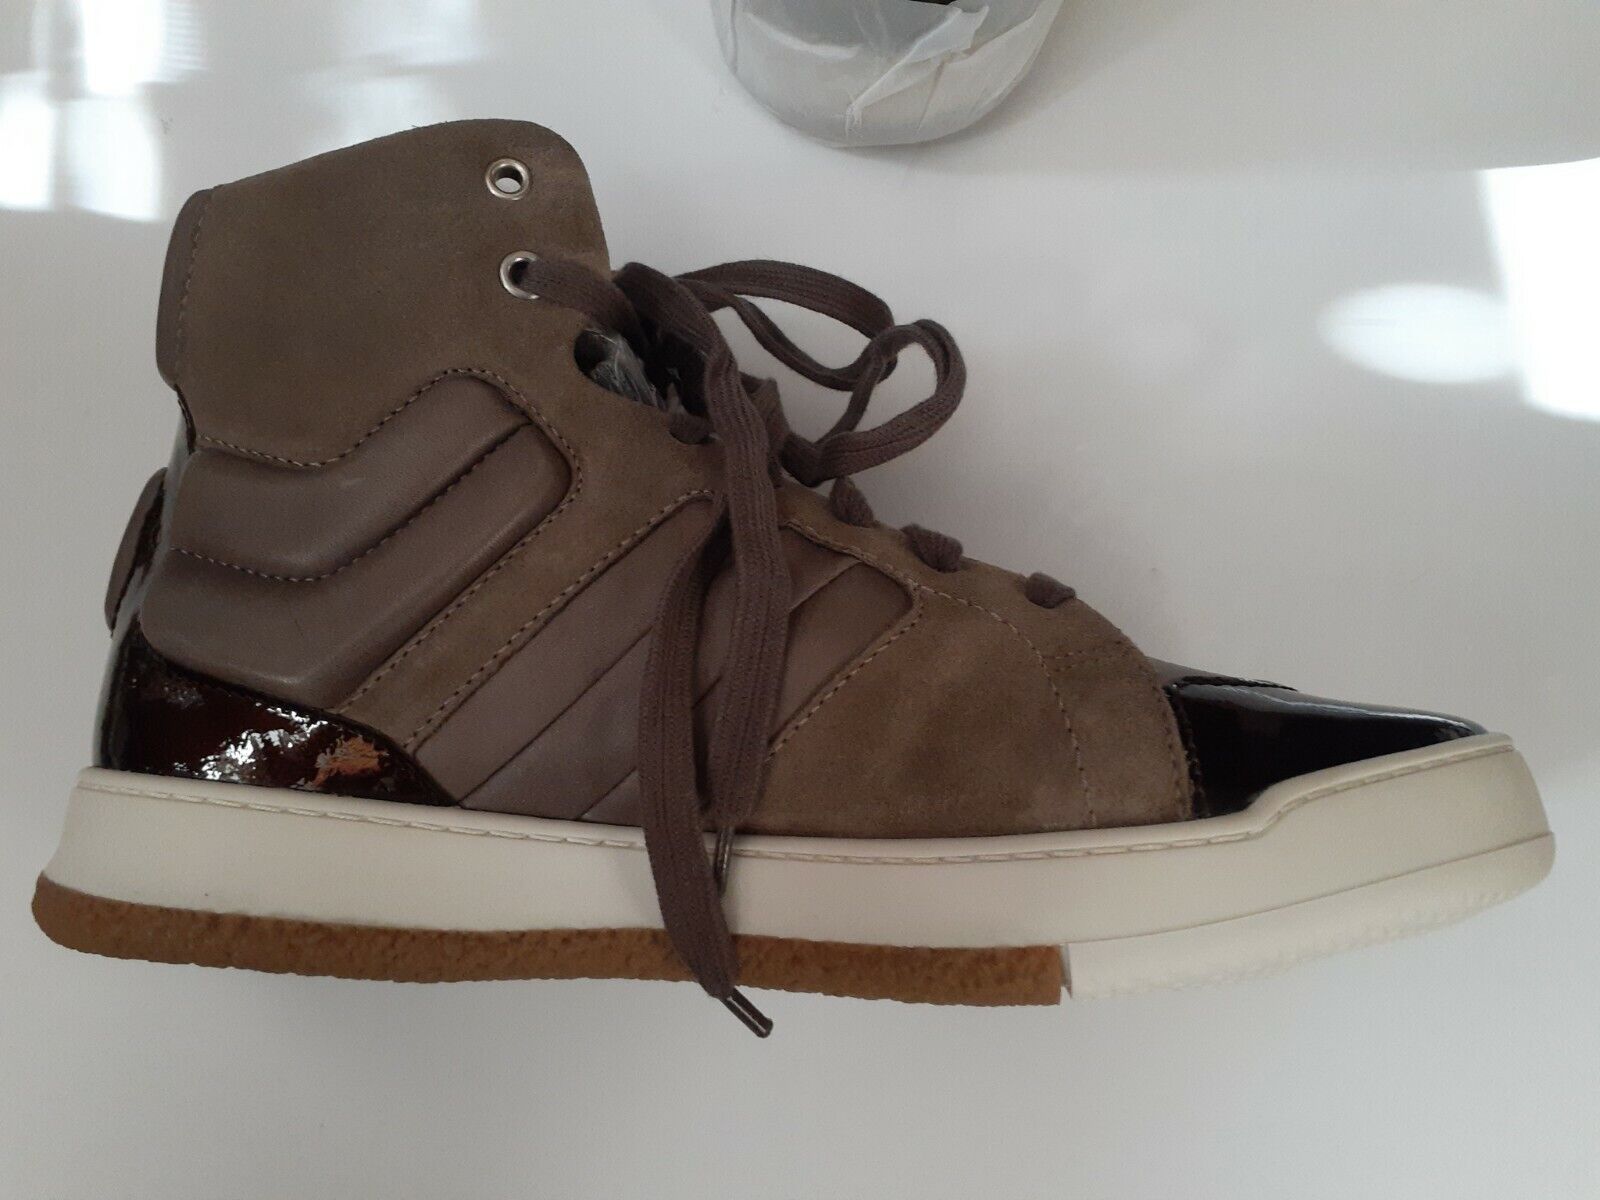 Mens Bally Sneakers Rare Patent Leather/Suede Size 7.5 | eBay